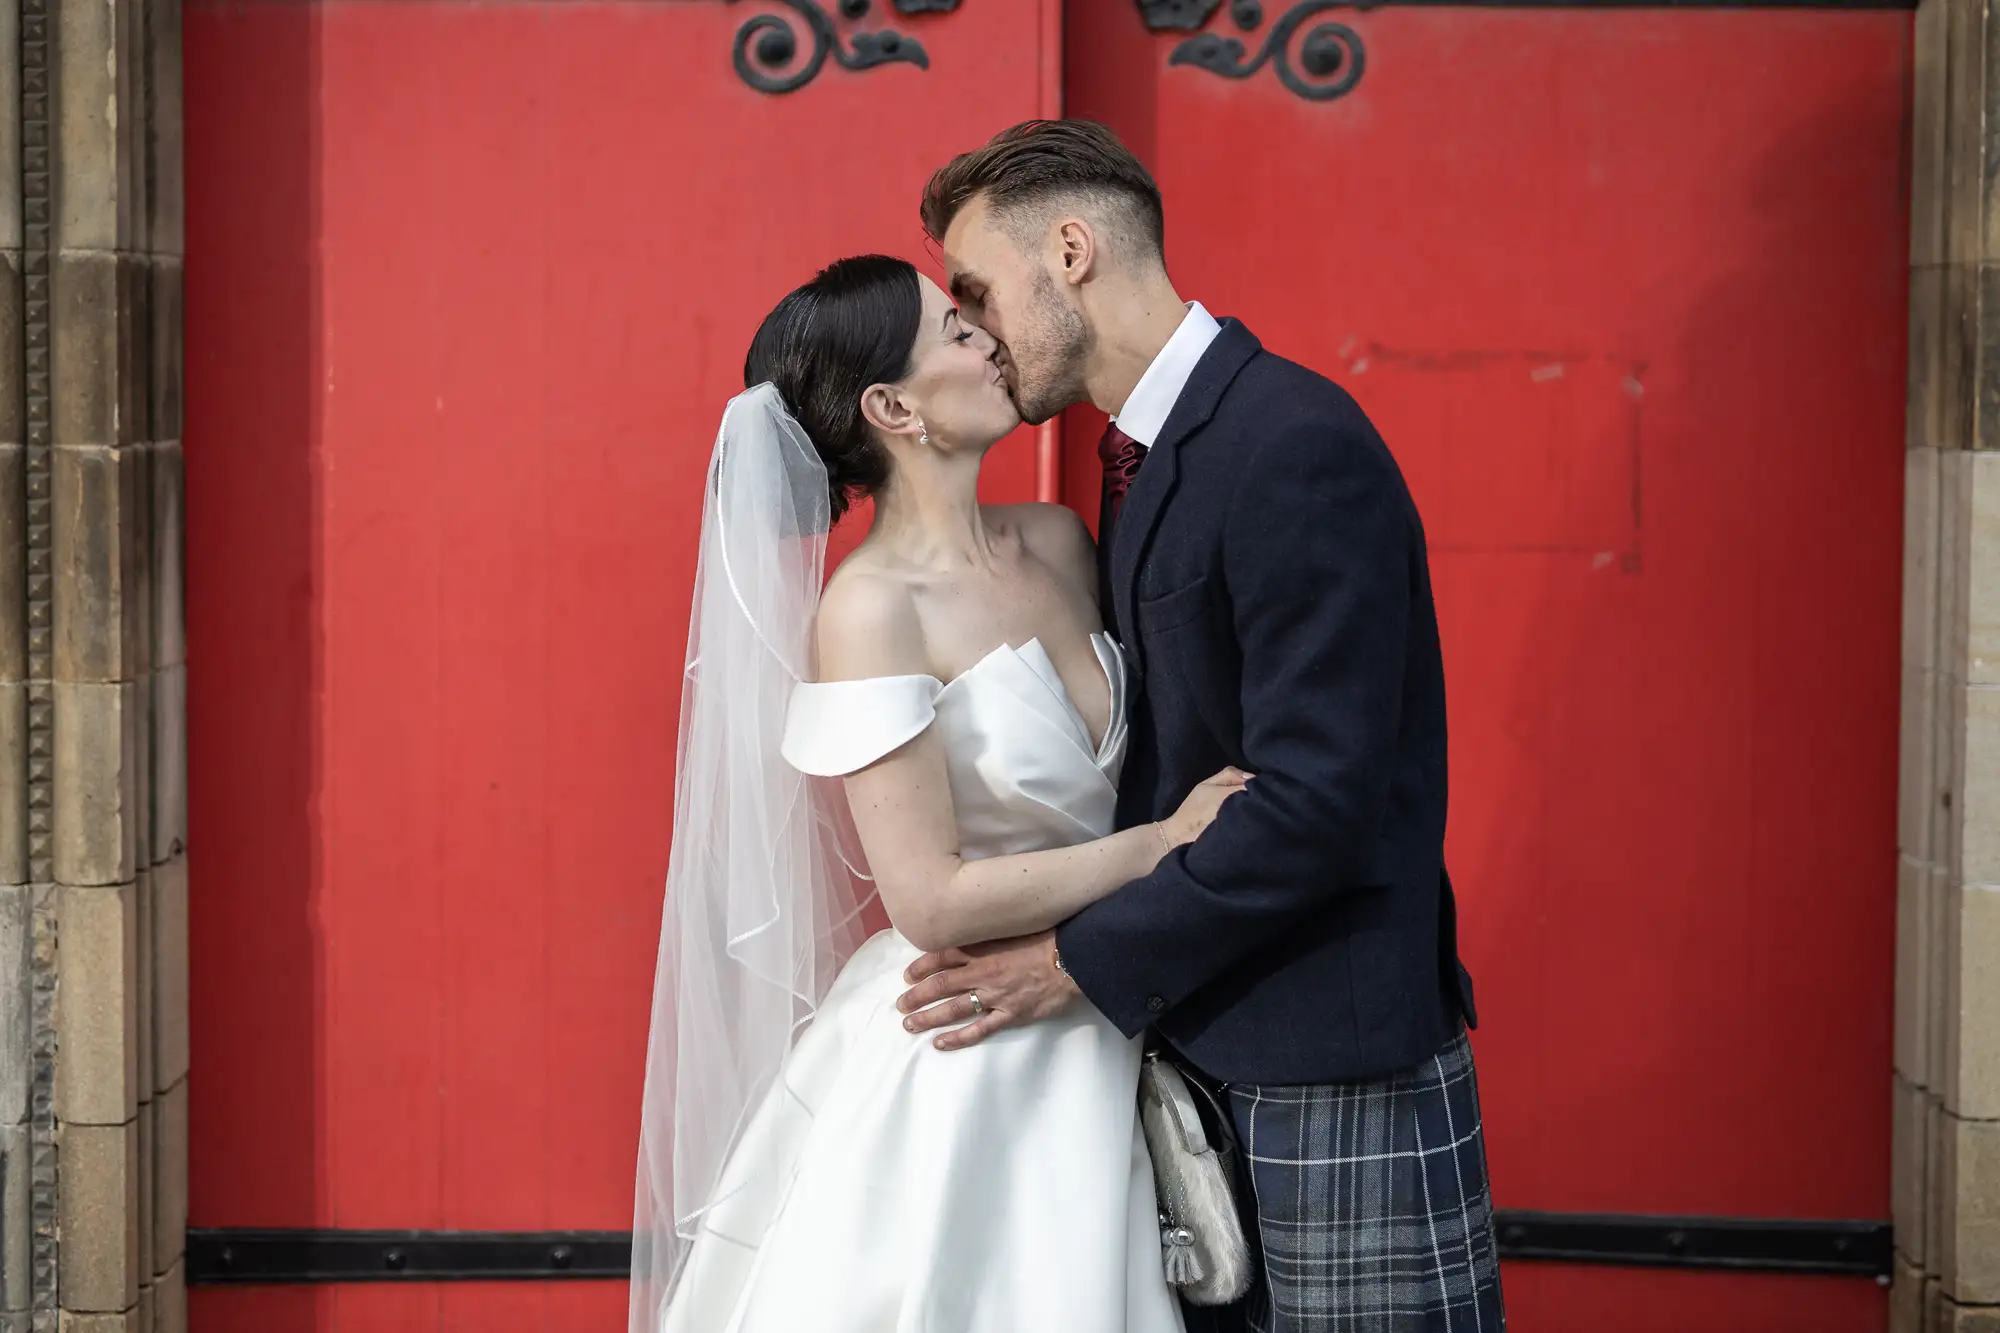 A newlywed couple kissing outside a red door, the bride in a white dress and veil, the groom in a kilt and jacket.